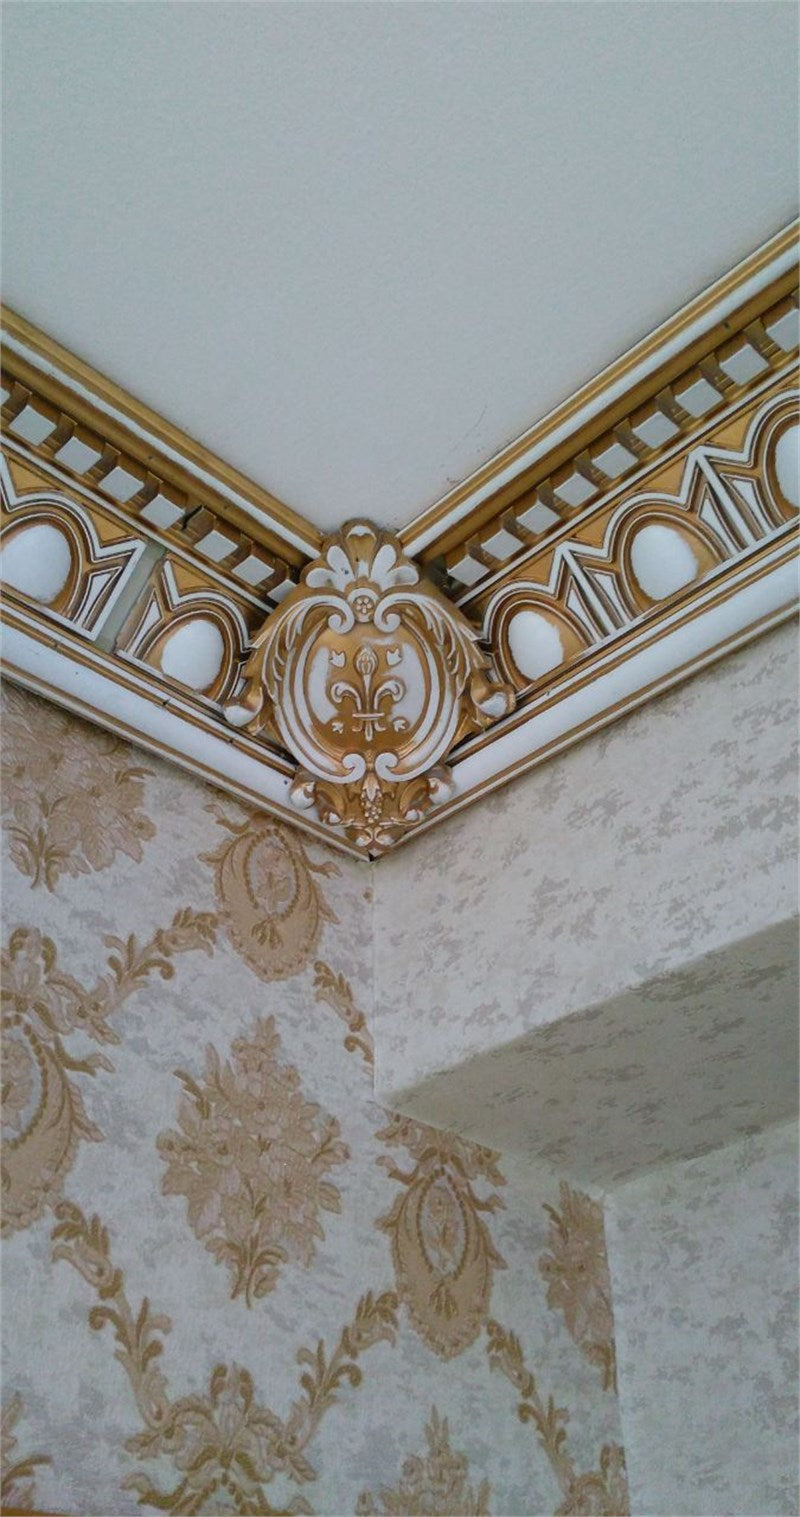 CORNER CEILING AND WALL MOTIF - POLYSTYRENE - DGM54-P- JOINT PATINA 17*13cm